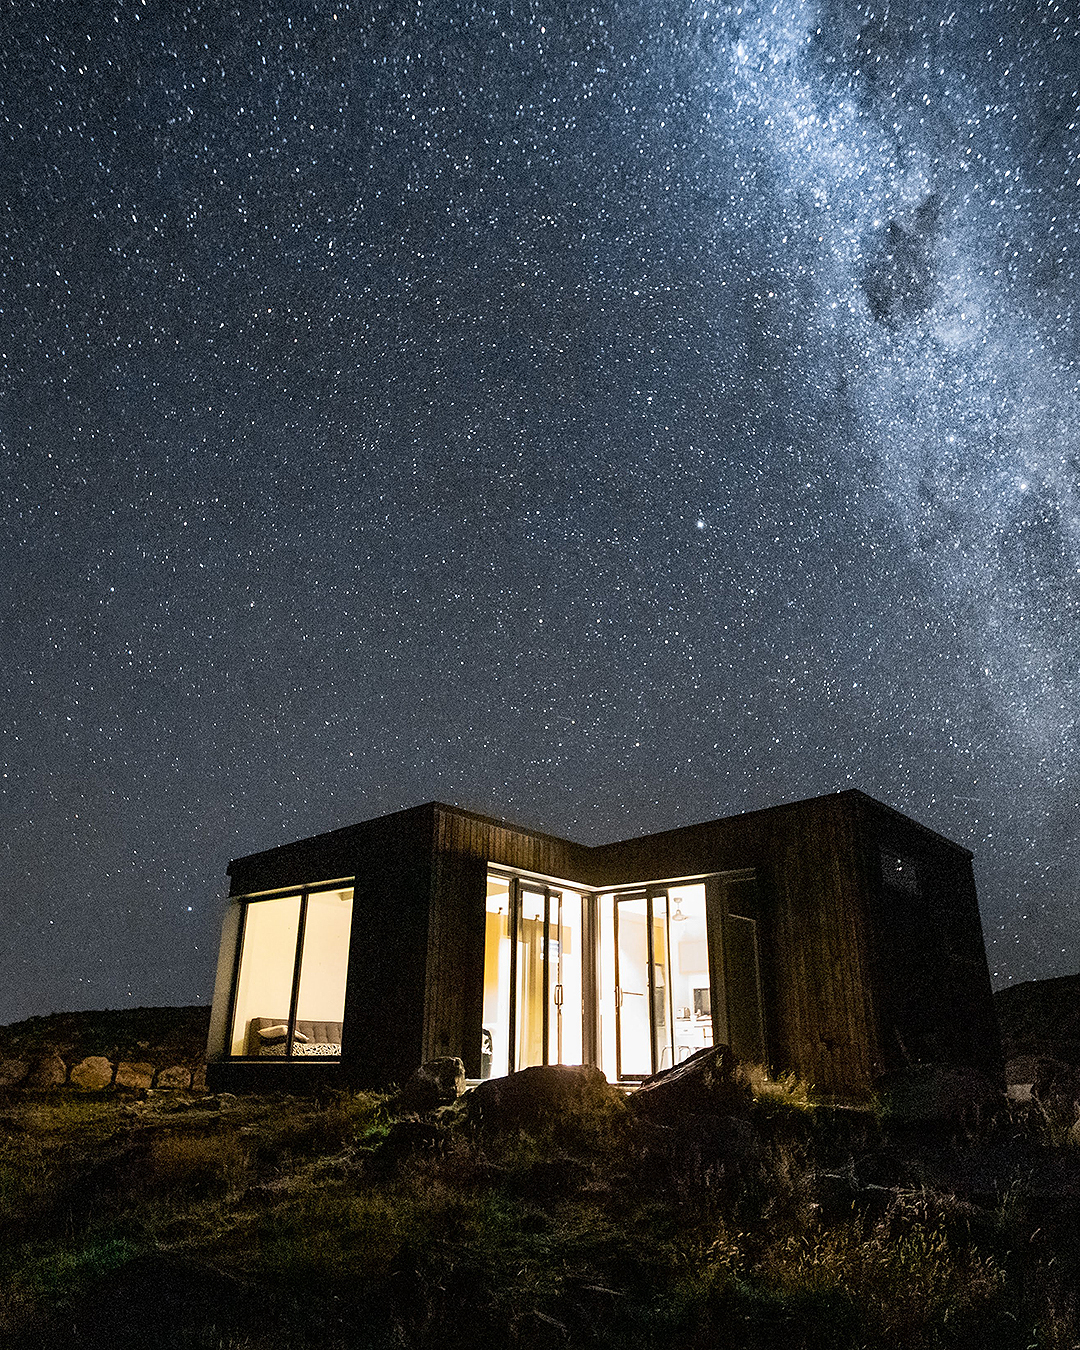 A house seen outside under a starry sky.